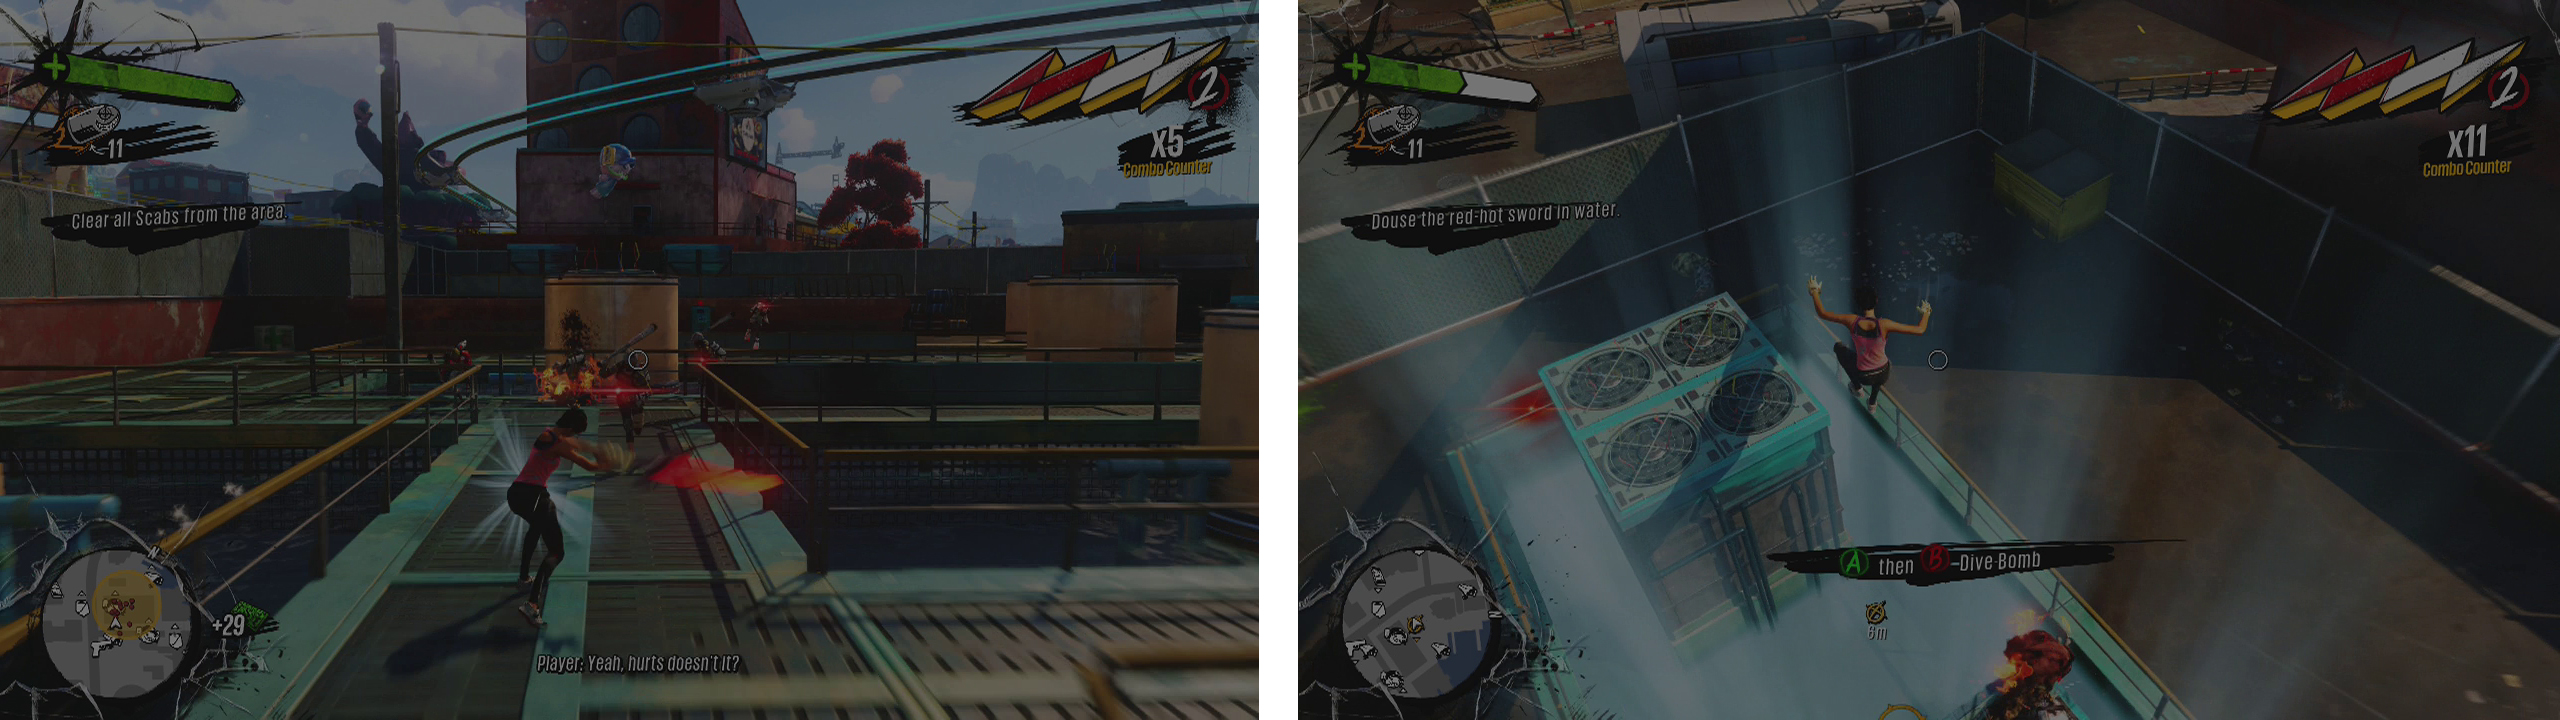 Use your new weapon to help eliminate the Scabs (left). Then divebomb the indicated pool of water (right).